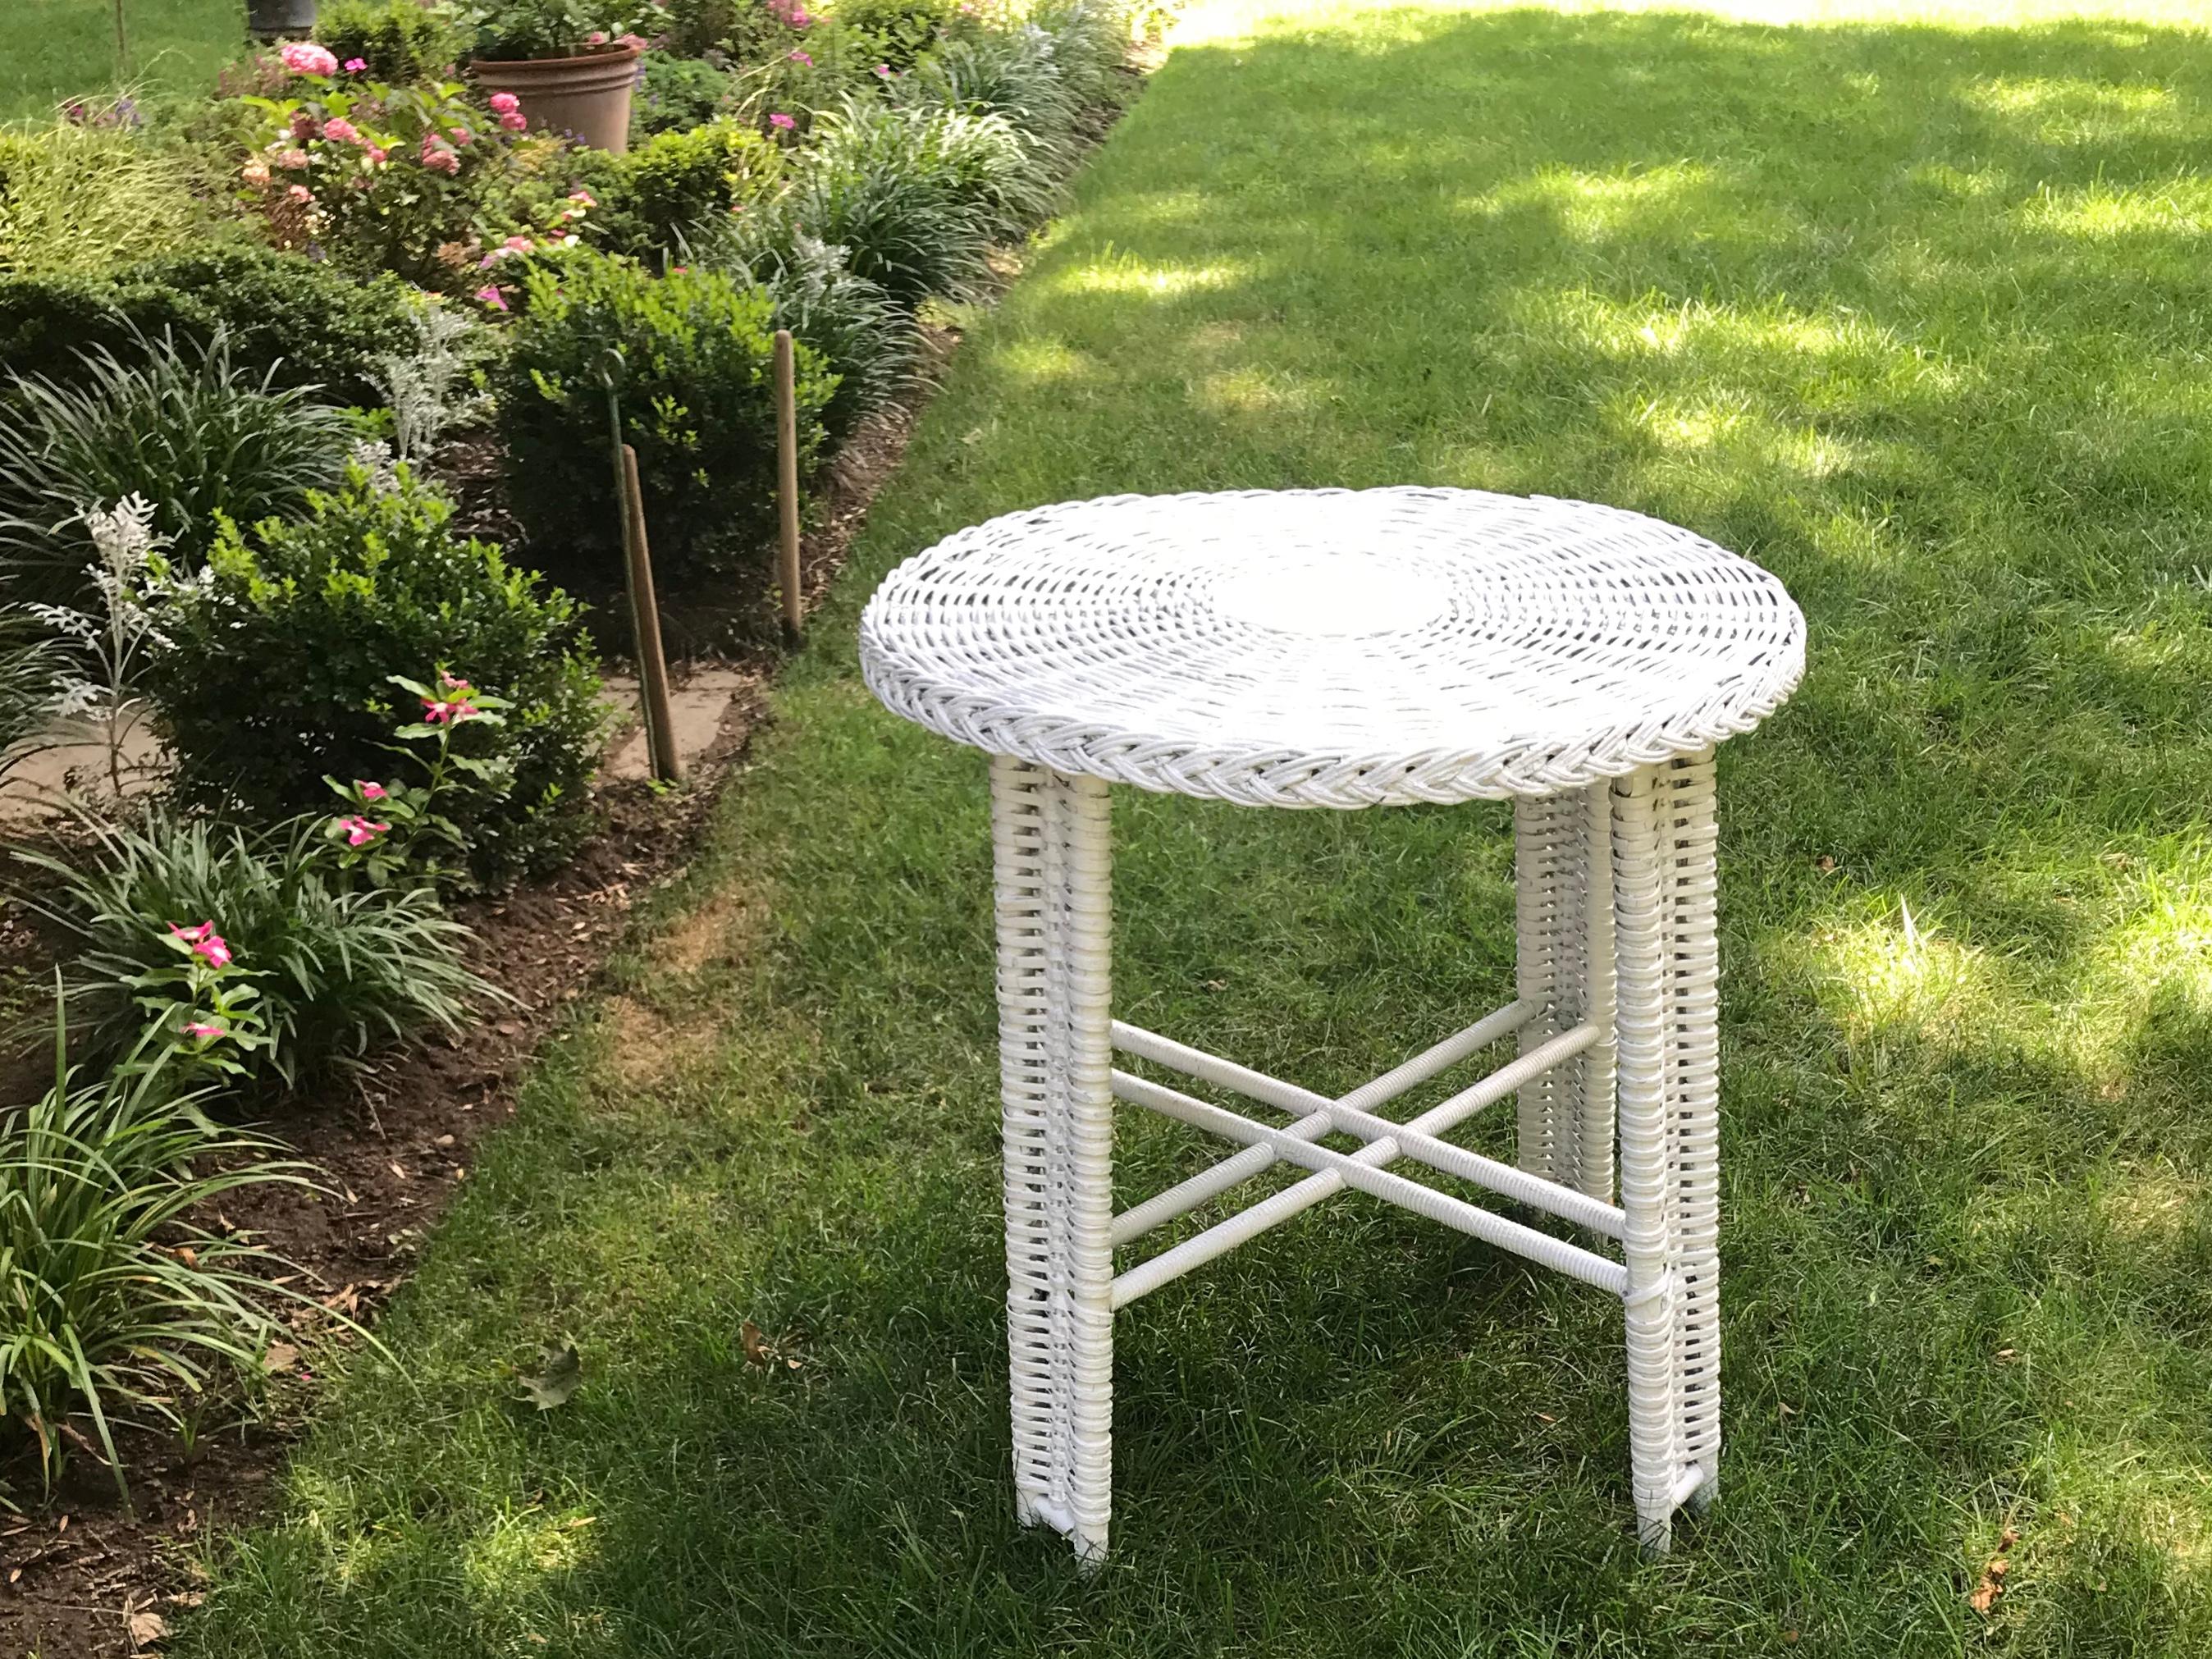 Round white wicker table antique white painted round wicker table on four interlocked webbed legs with spindle stretchers in original condition This is the original type of oft painted old wicker pieces found on many an American summer porch with